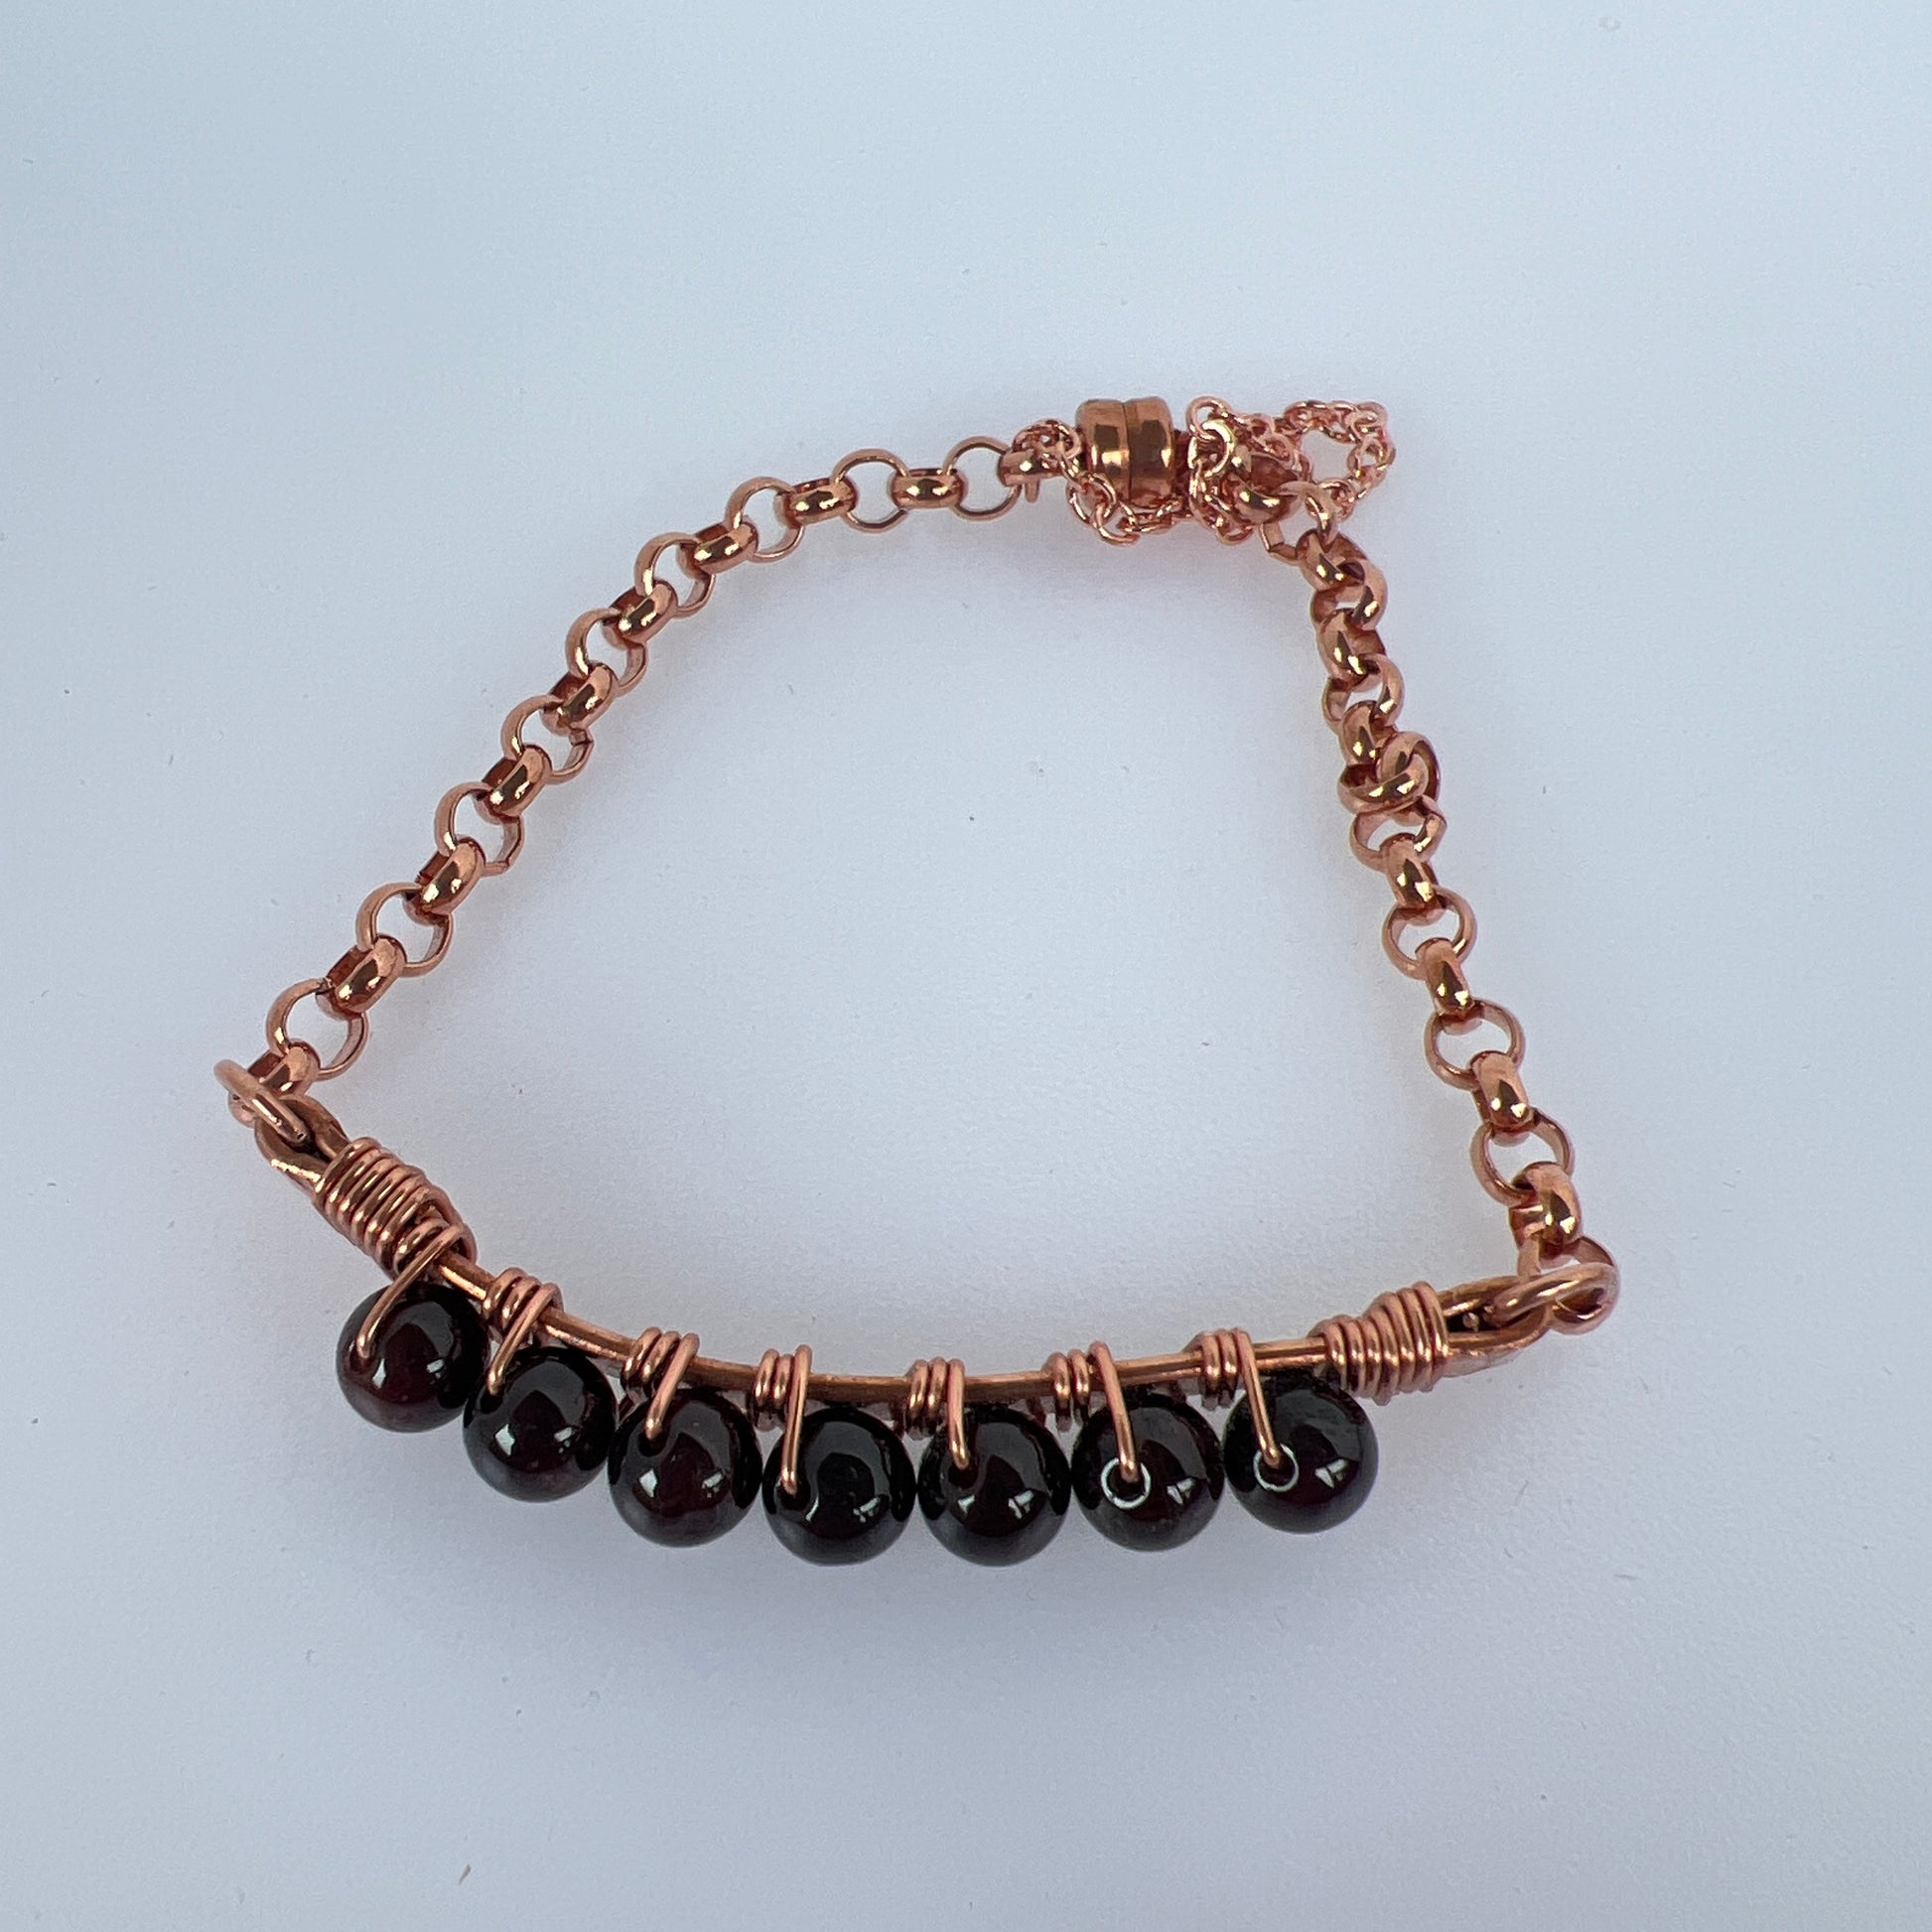 6mm red garnet wire wrapped on copper plated and copper rolo chain finished up with copper magnet